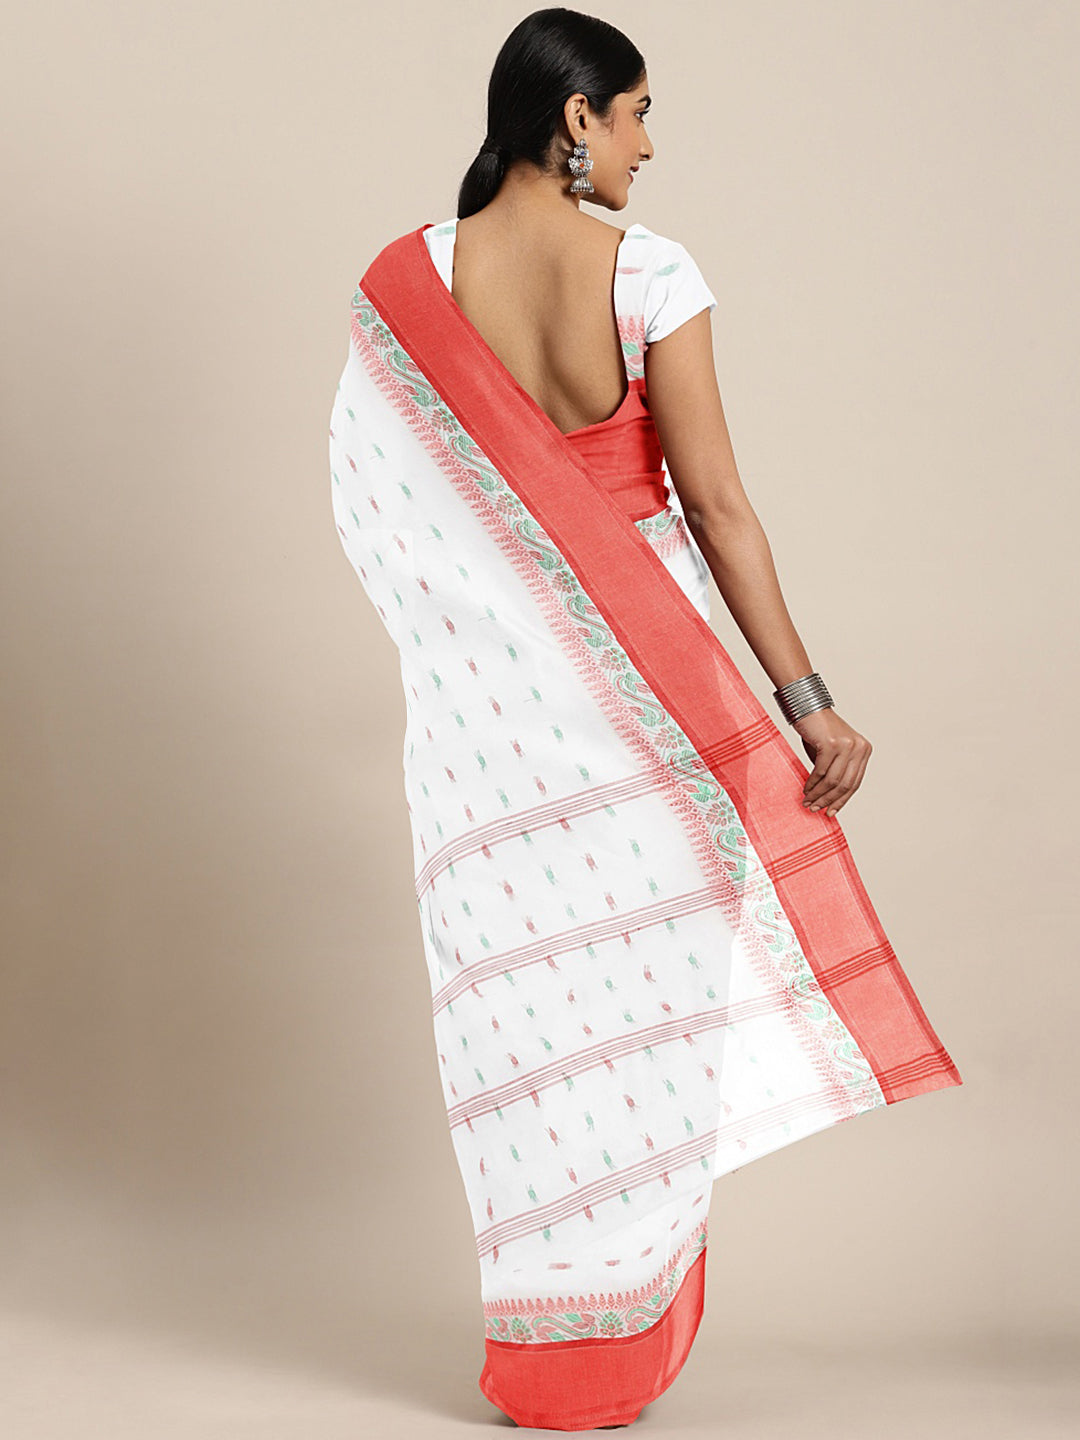 White Tant Woven Design Saree Without Blouse Piece DUTASA033 DUTASA033-Saree-Kalakari India-DUTASA033-Geographical Indication, Hand Crafted, Heritage Prints, Natural Dyes, Sarees, Silk Cotton, Sustainable Fabrics, Taant, Tant, West Bengal, Woven-[Linen,Ethnic,wear,Fashionista,Handloom,Handicraft,Indigo,blockprint,block,print,Cotton,Chanderi,Blue, latest,classy,party,bollywood,trendy,summer,style,traditional,formal,elegant,unique,style,hand,block,print, dabu,booti,gift,present,glamorous,affordabl